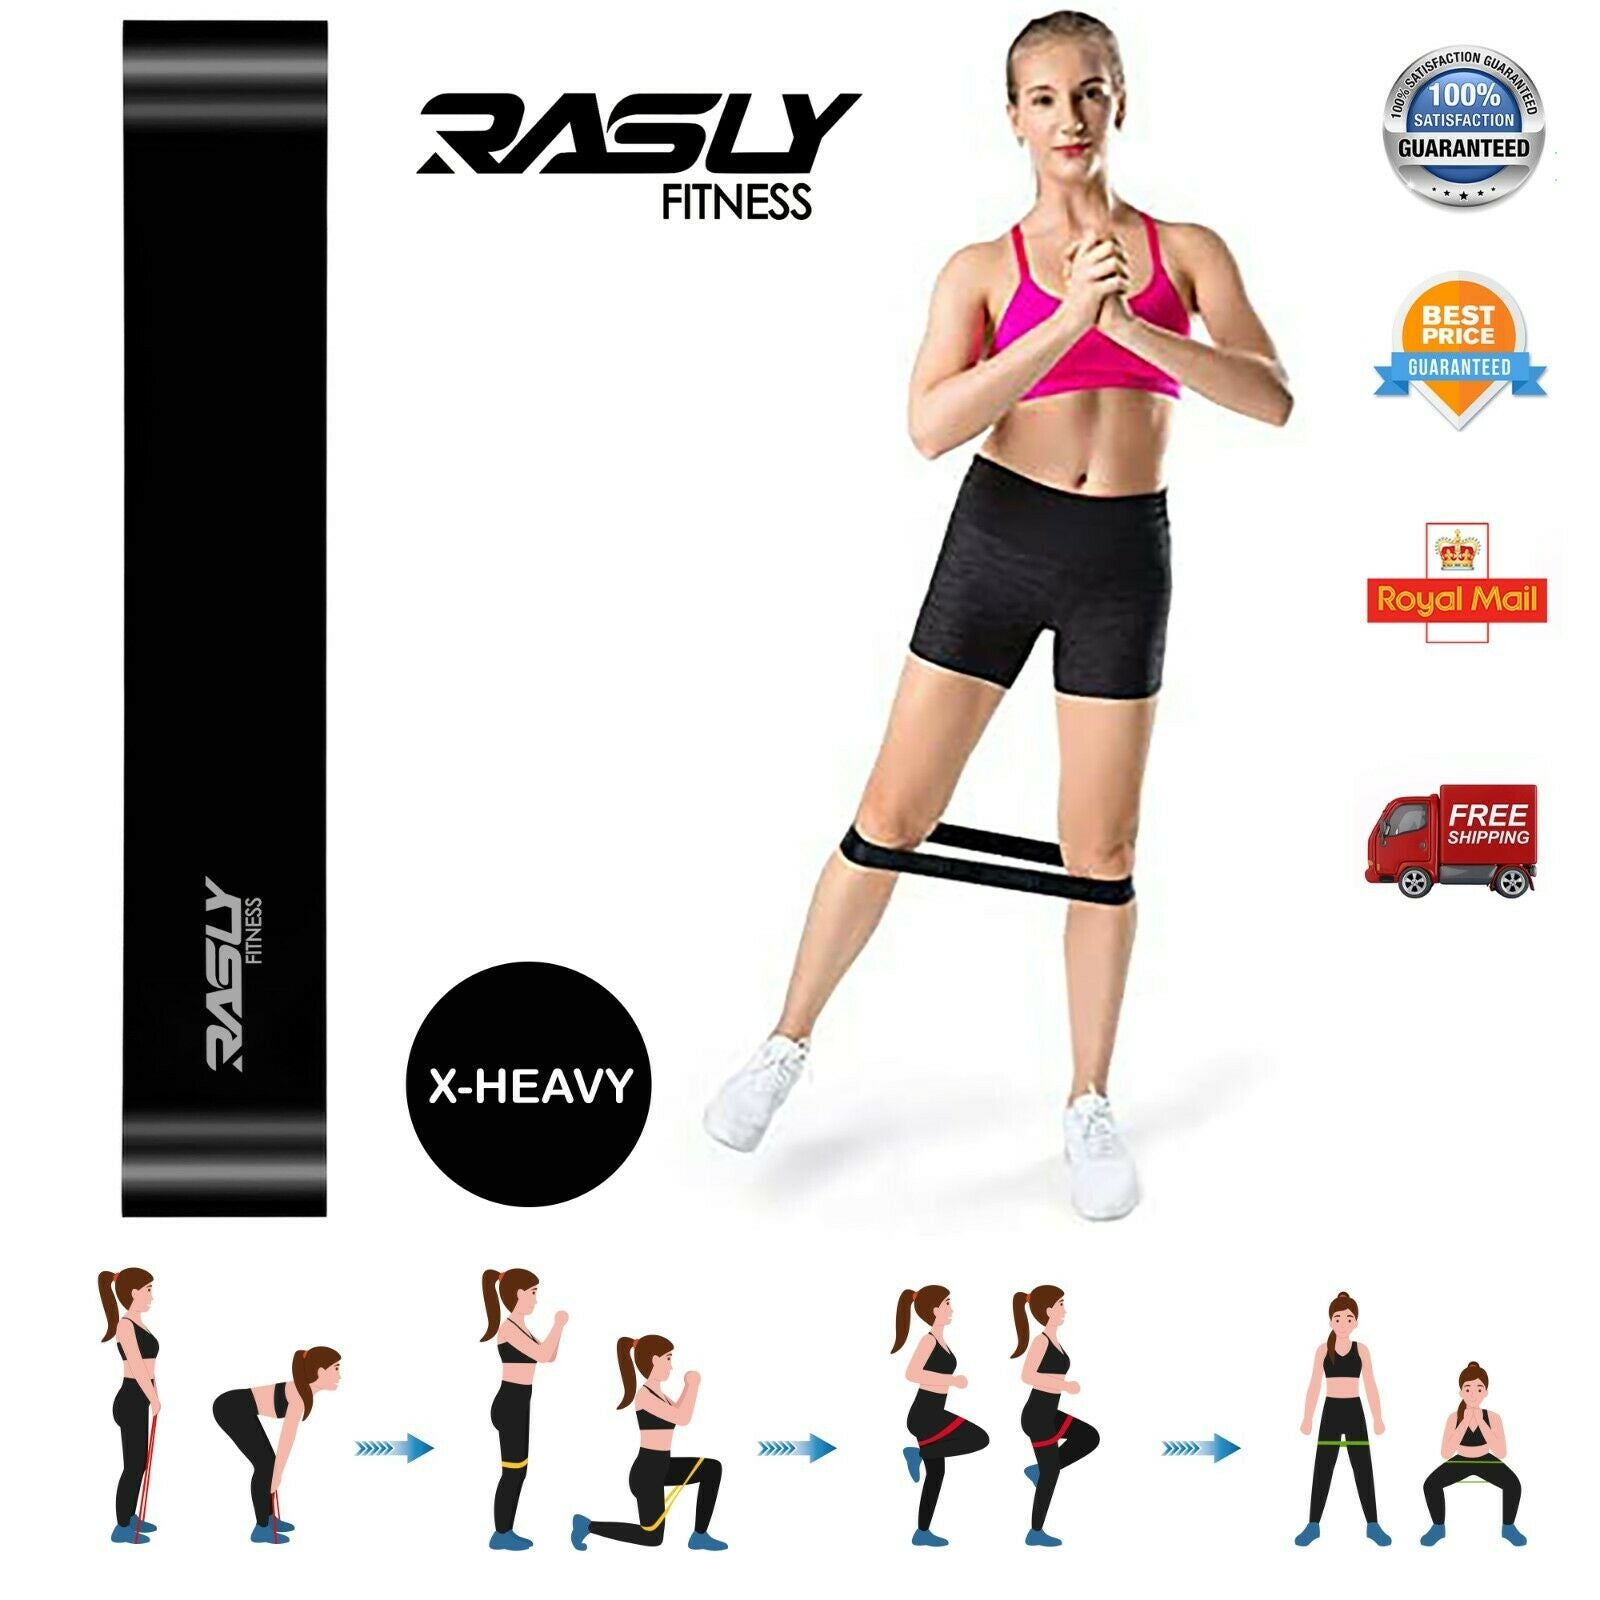 Resistance Band Exercises, Commercial Fitness